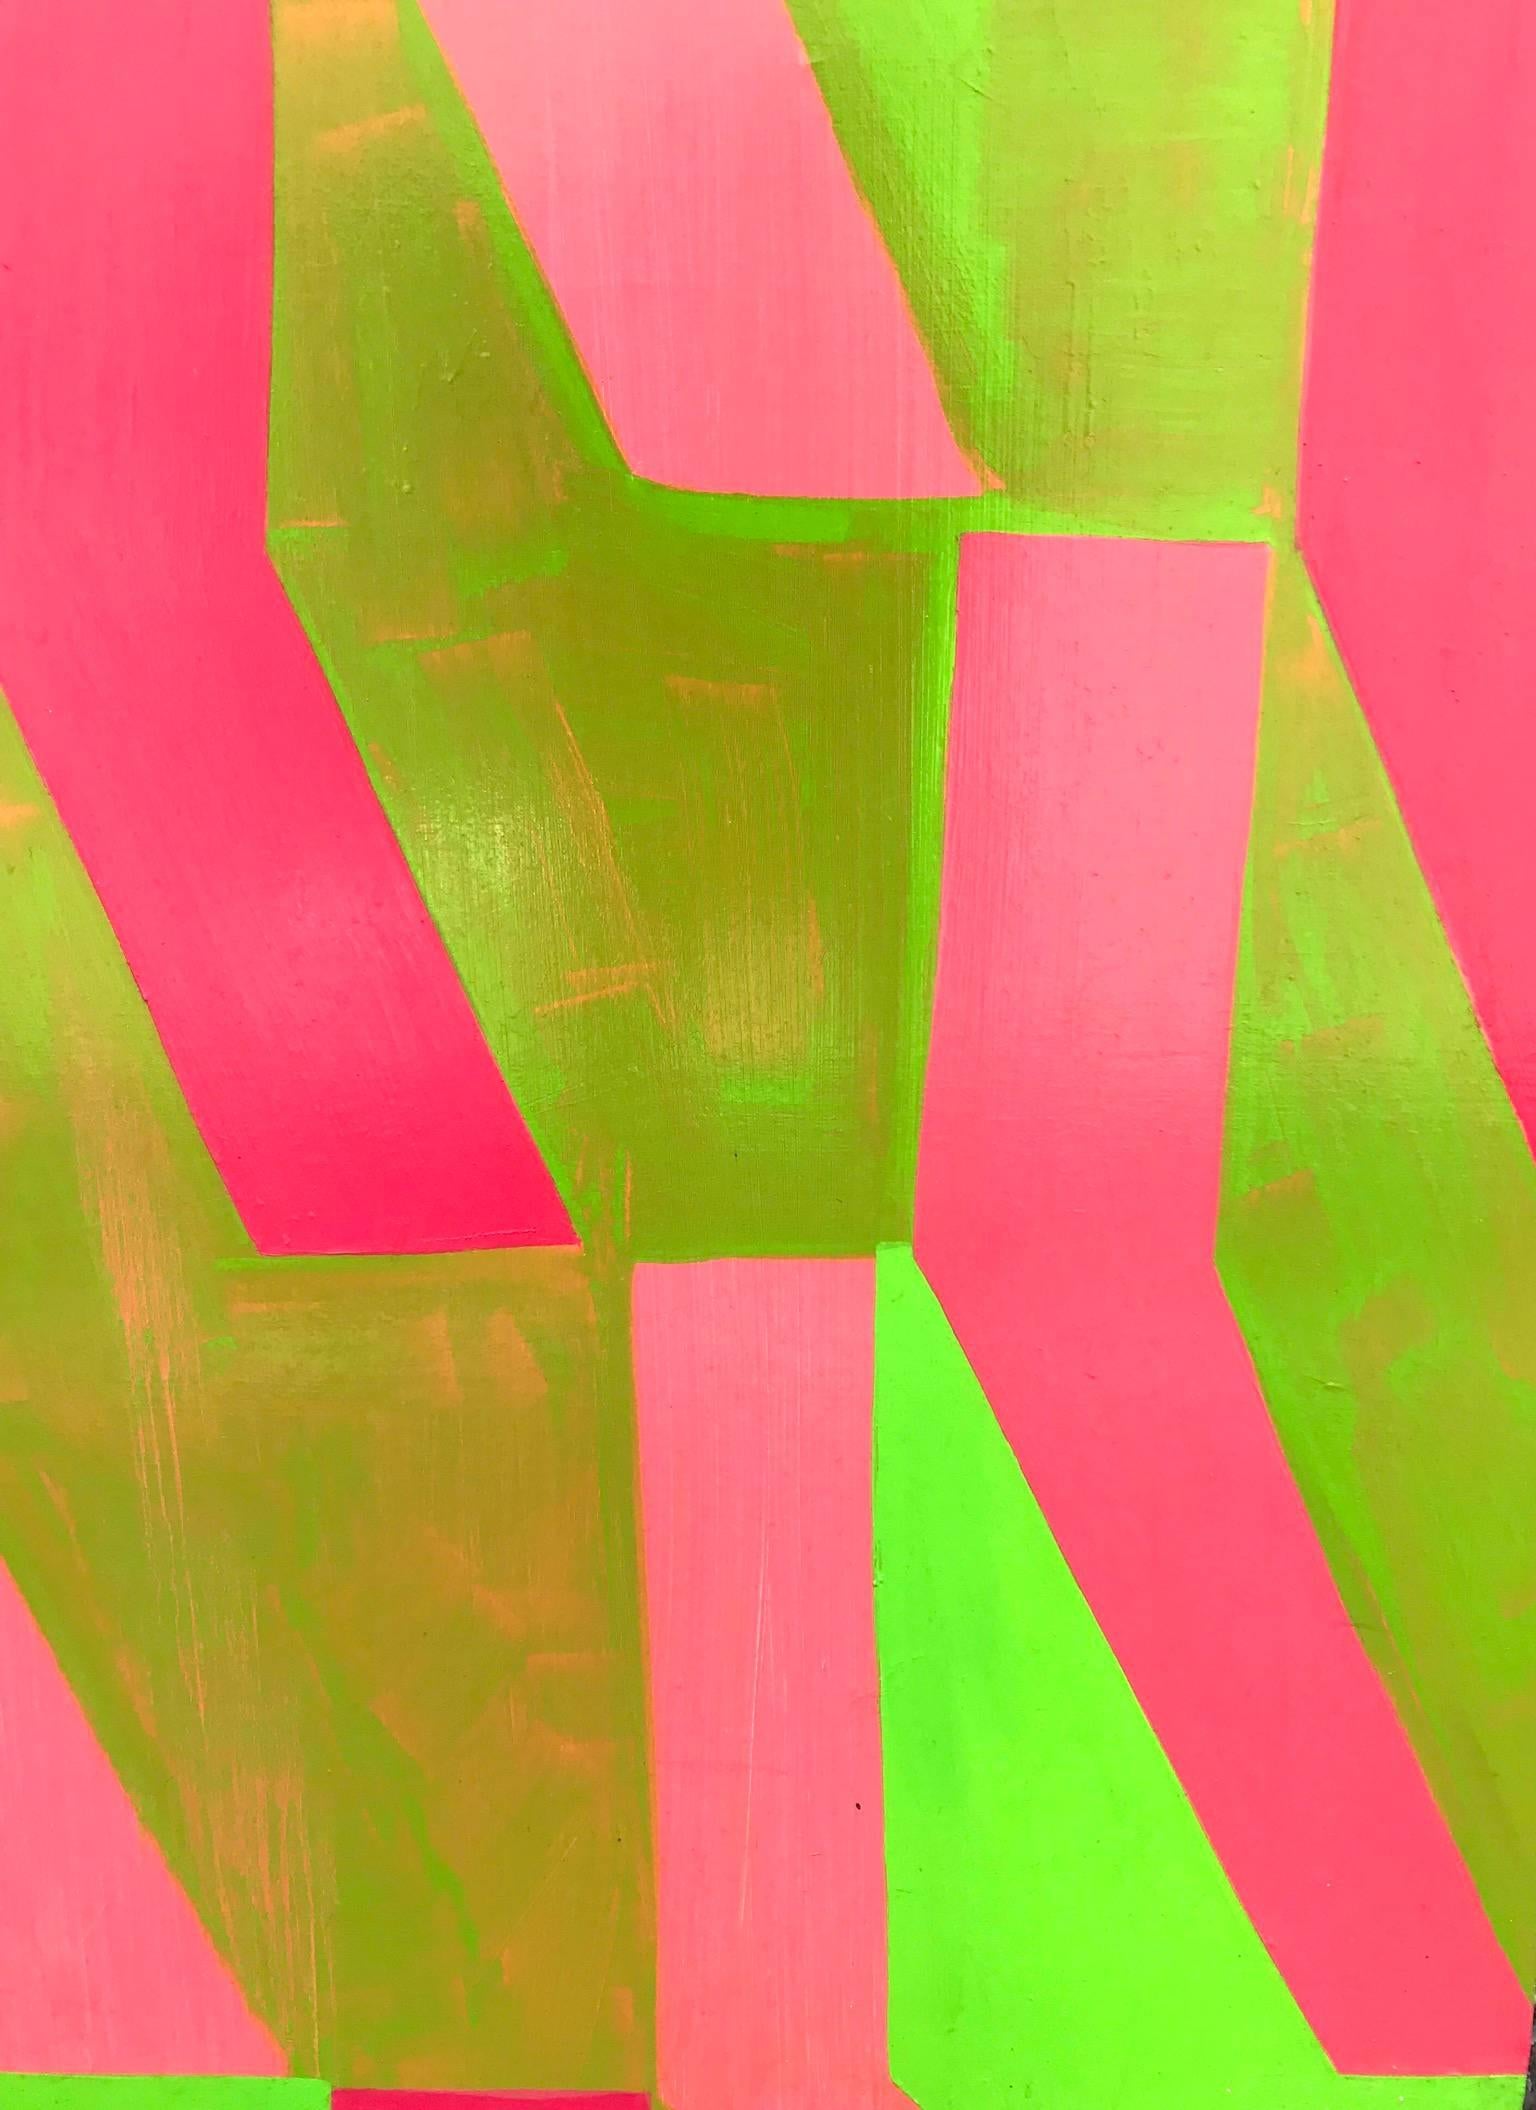 Large vibrant abstract oil painting on line by Washington DC area artist Kate Sable, 2011.